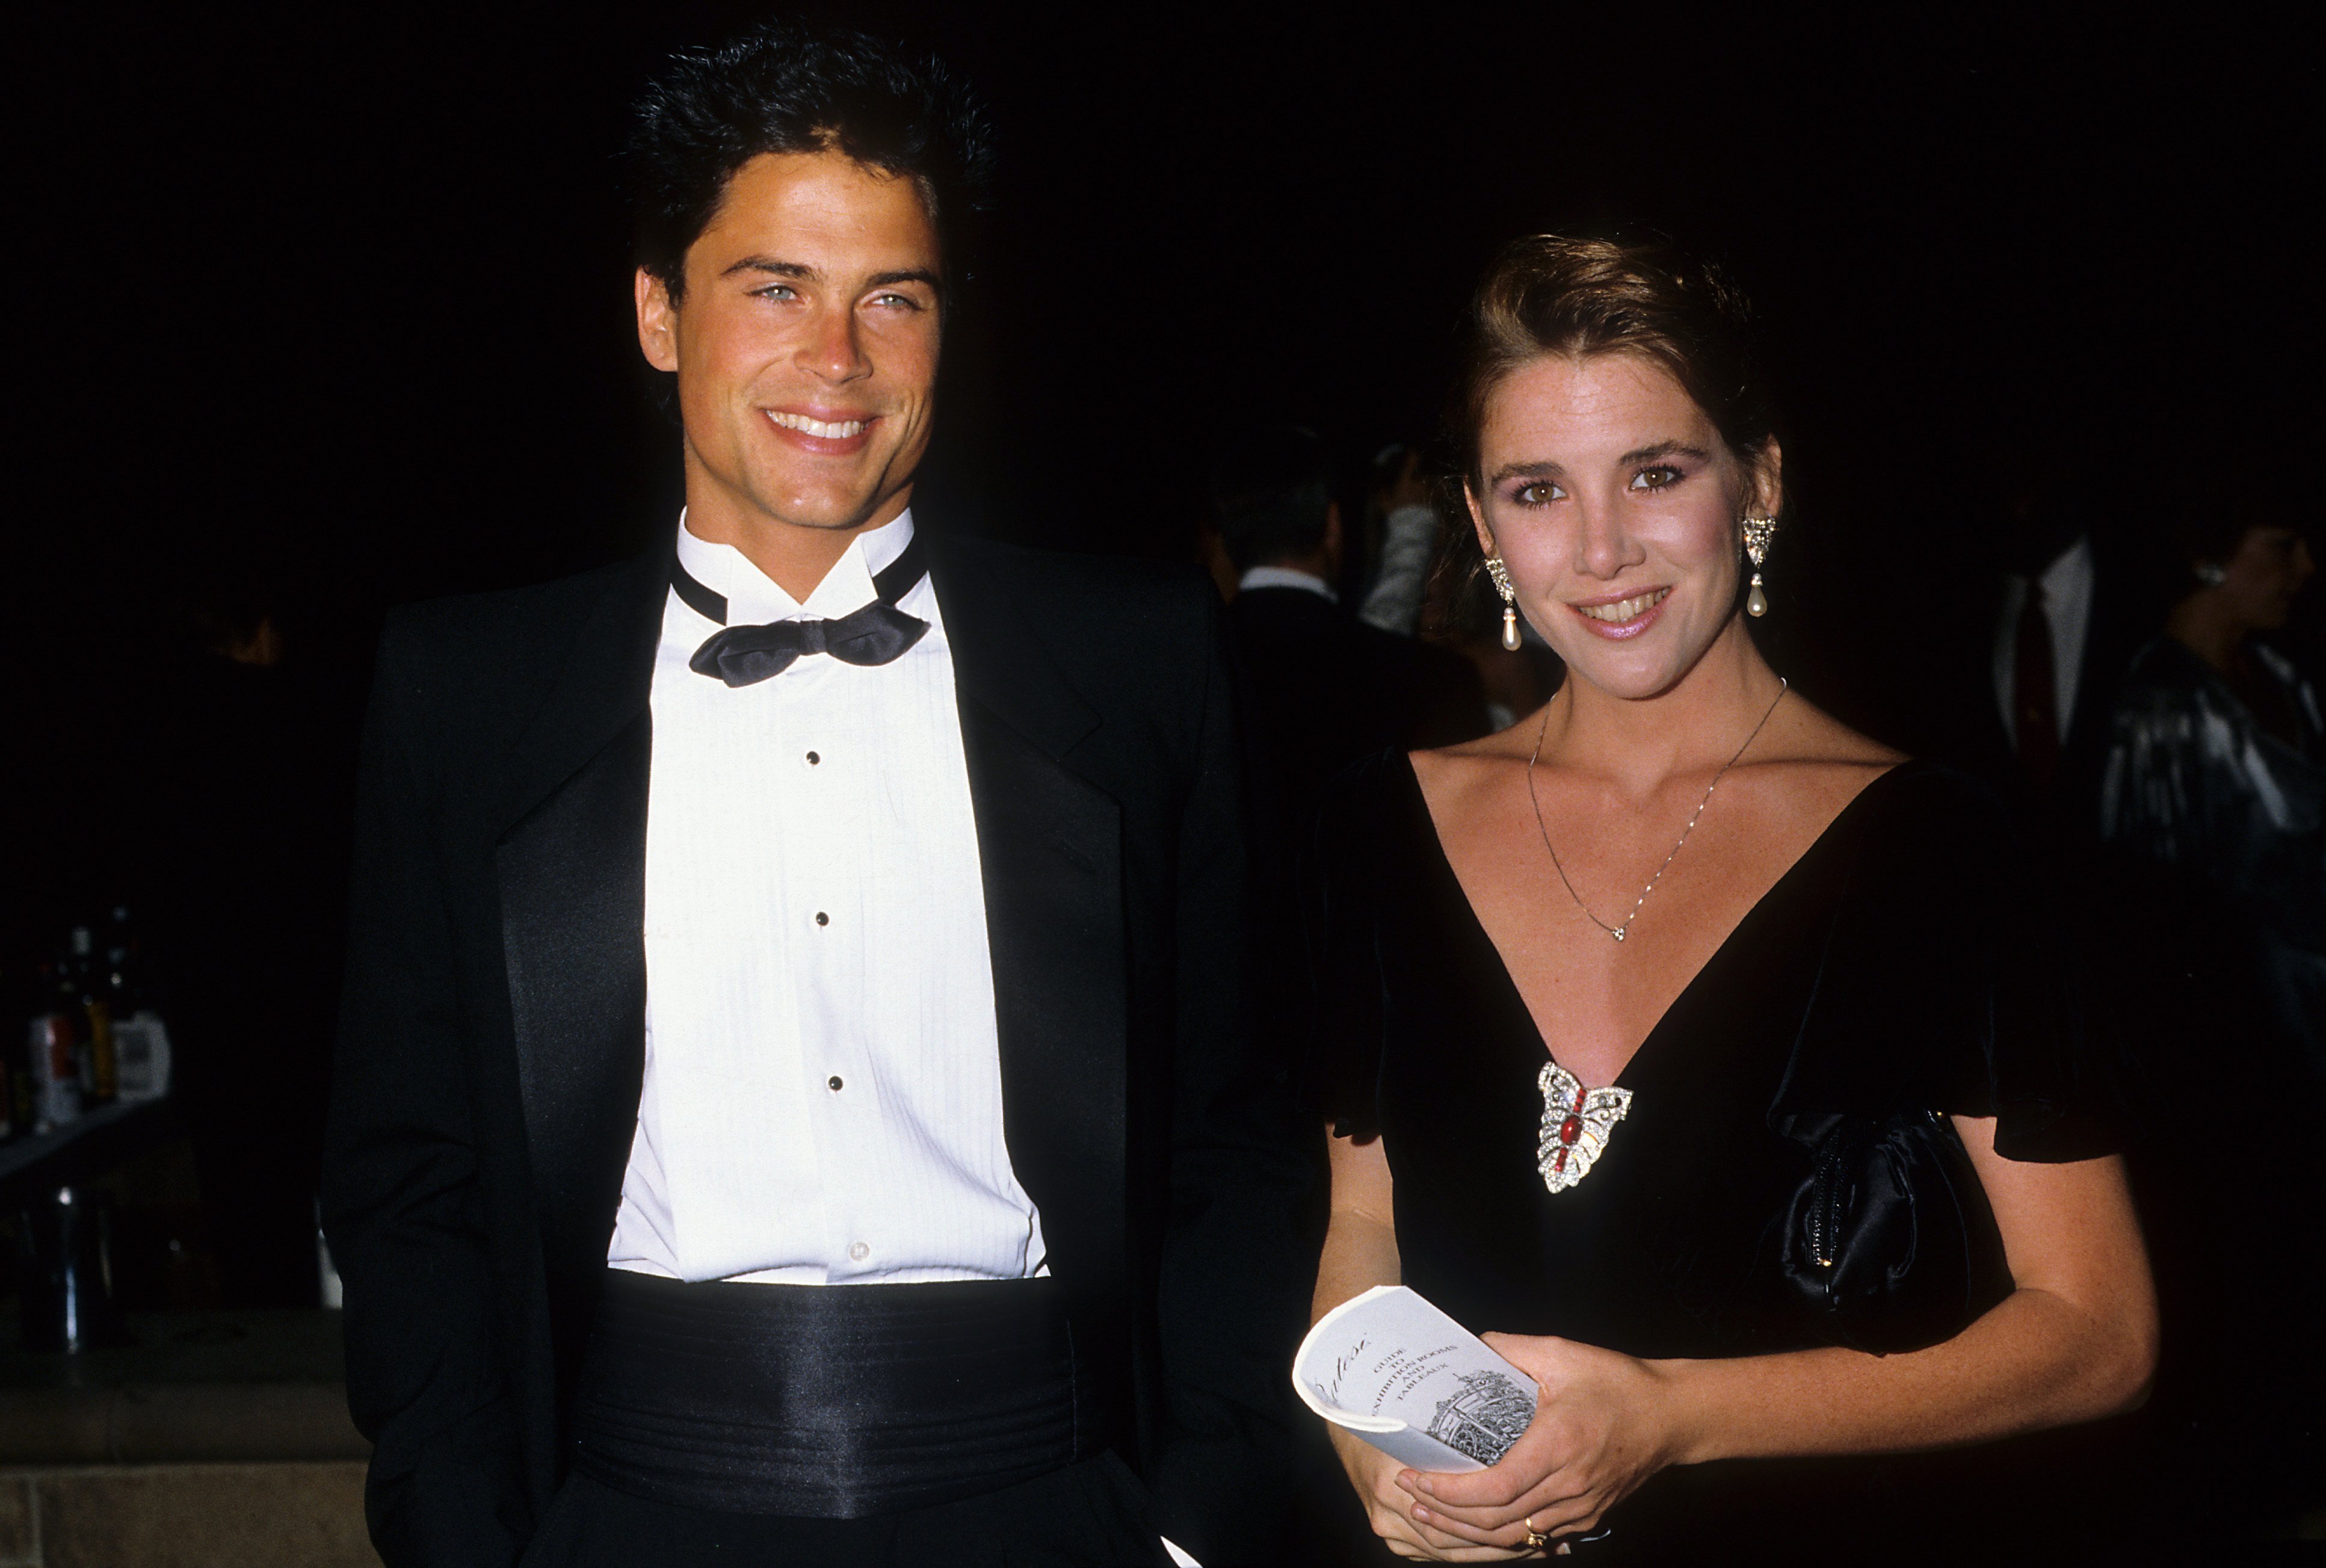 Rob Lowe and Melissa Gilbert | Donaldson Collection/Michael Ochs Archives/Getty Images